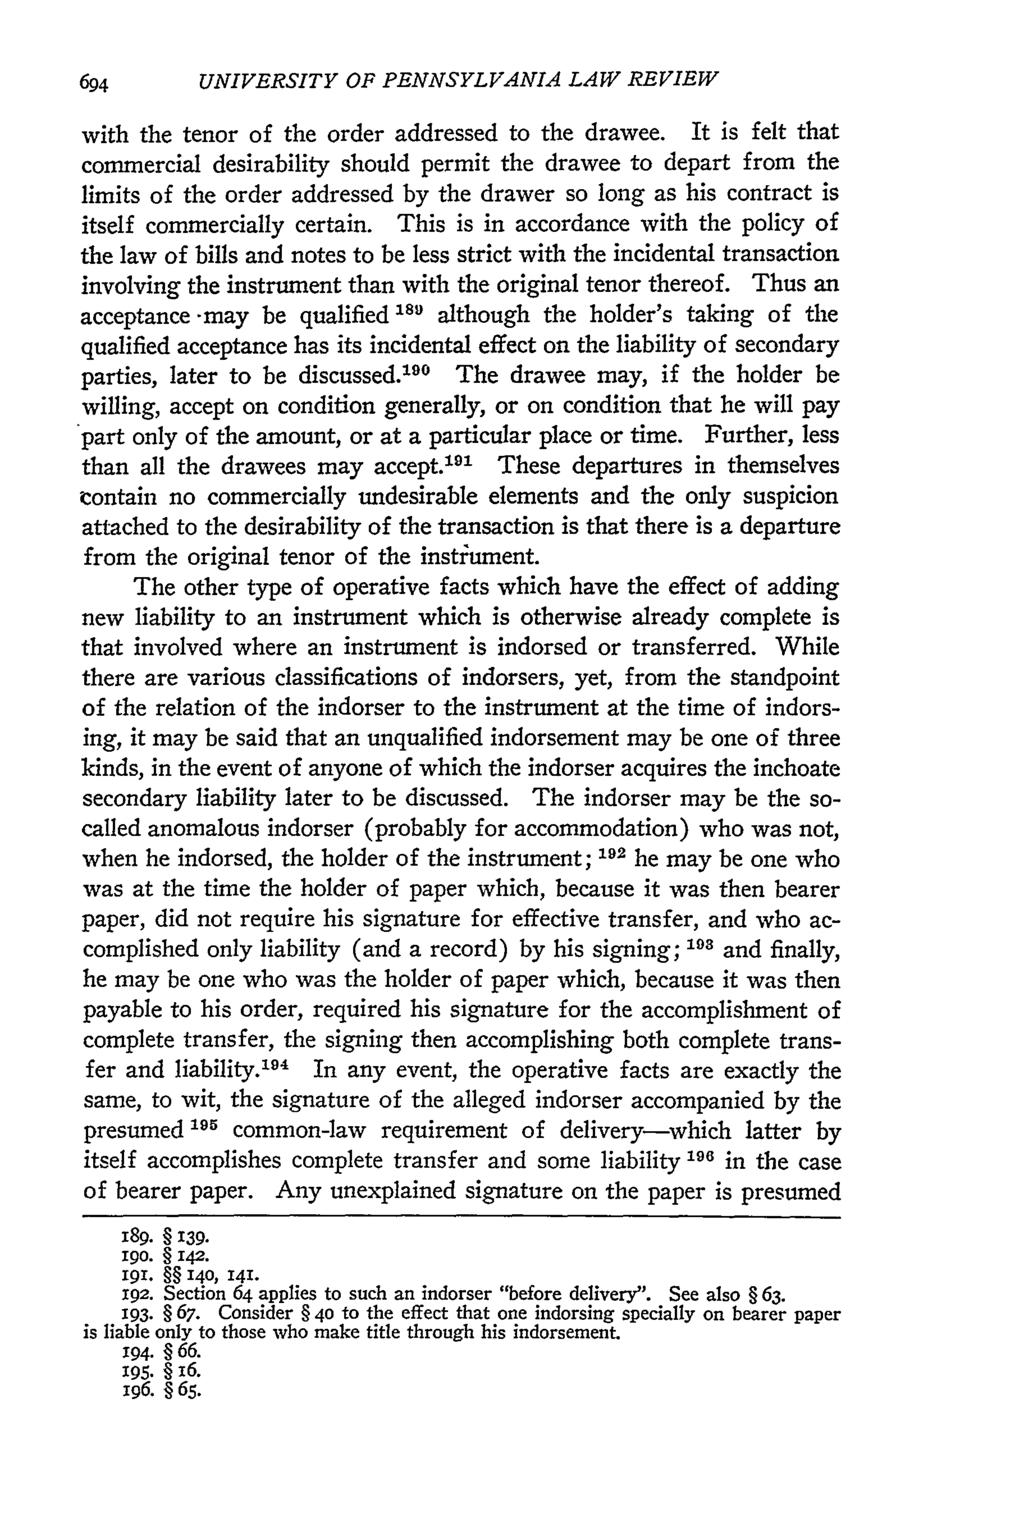 694 UNIVERSITY OF PENNSYLVANIA LAW REVIEW with the tenor of the order addressed to the drawee.